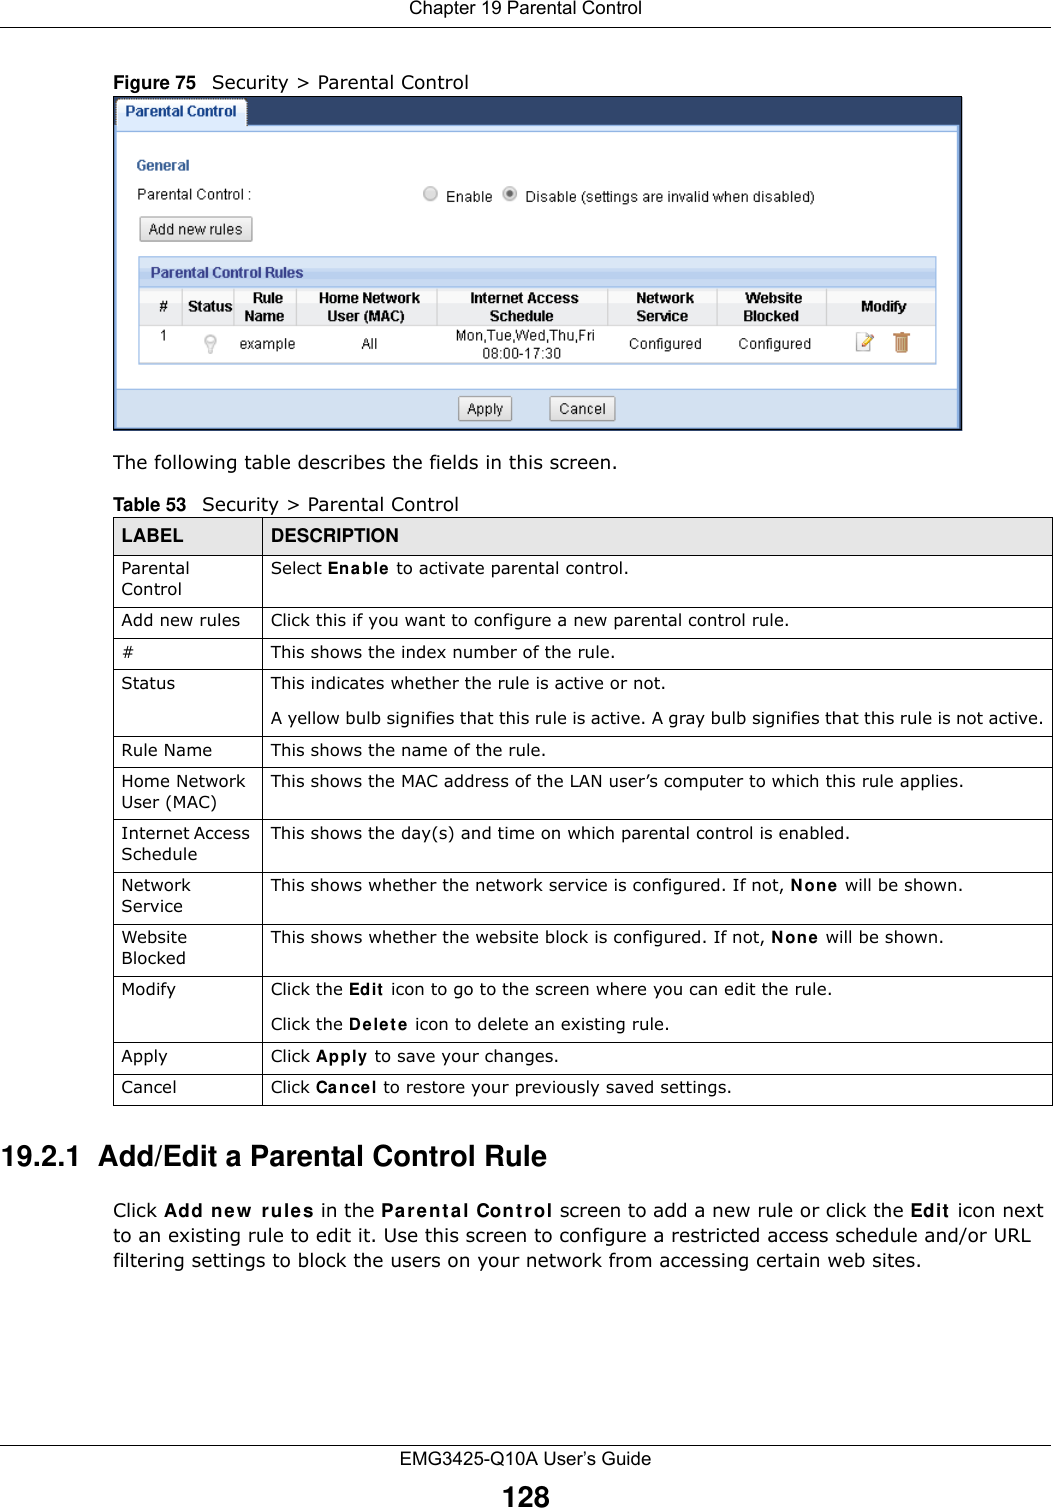 Chapter 19 Parental ControlEMG3425-Q10A User’s Guide128Figure 75   Security &gt; Parental Control The following table describes the fields in this screen. 19.2.1  Add/Edit a Parental Control RuleClick Add new  rules in the Par e n t al Cont rol screen to add a new rule or click the Edit  icon next to an existing rule to edit it. Use this screen to configure a restricted access schedule and/or URL filtering settings to block the users on your network from accessing certain web sites.Table 53   Security &gt; Parental ControlLABEL DESCRIPTIONParental ControlSelect Ena ble to activate parental control.Add new rules Click this if you want to configure a new parental control rule.#This shows the index number of the rule.Status This indicates whether the rule is active or not.A yellow bulb signifies that this rule is active. A gray bulb signifies that this rule is not active.Rule Name This shows the name of the rule.Home Network User (MAC)This shows the MAC address of the LAN user’s computer to which this rule applies.Internet Access ScheduleThis shows the day(s) and time on which parental control is enabled.Network ServiceThis shows whether the network service is configured. If not, N one  will be shown.Website BlockedThis shows whether the website block is configured. If not, N on e  will be shown.Modify Click the Edit  icon to go to the screen where you can edit the rule.Click the D ele t e  icon to delete an existing rule.Apply Click Apply to save your changes.Cancel Click Cancel to restore your previously saved settings.